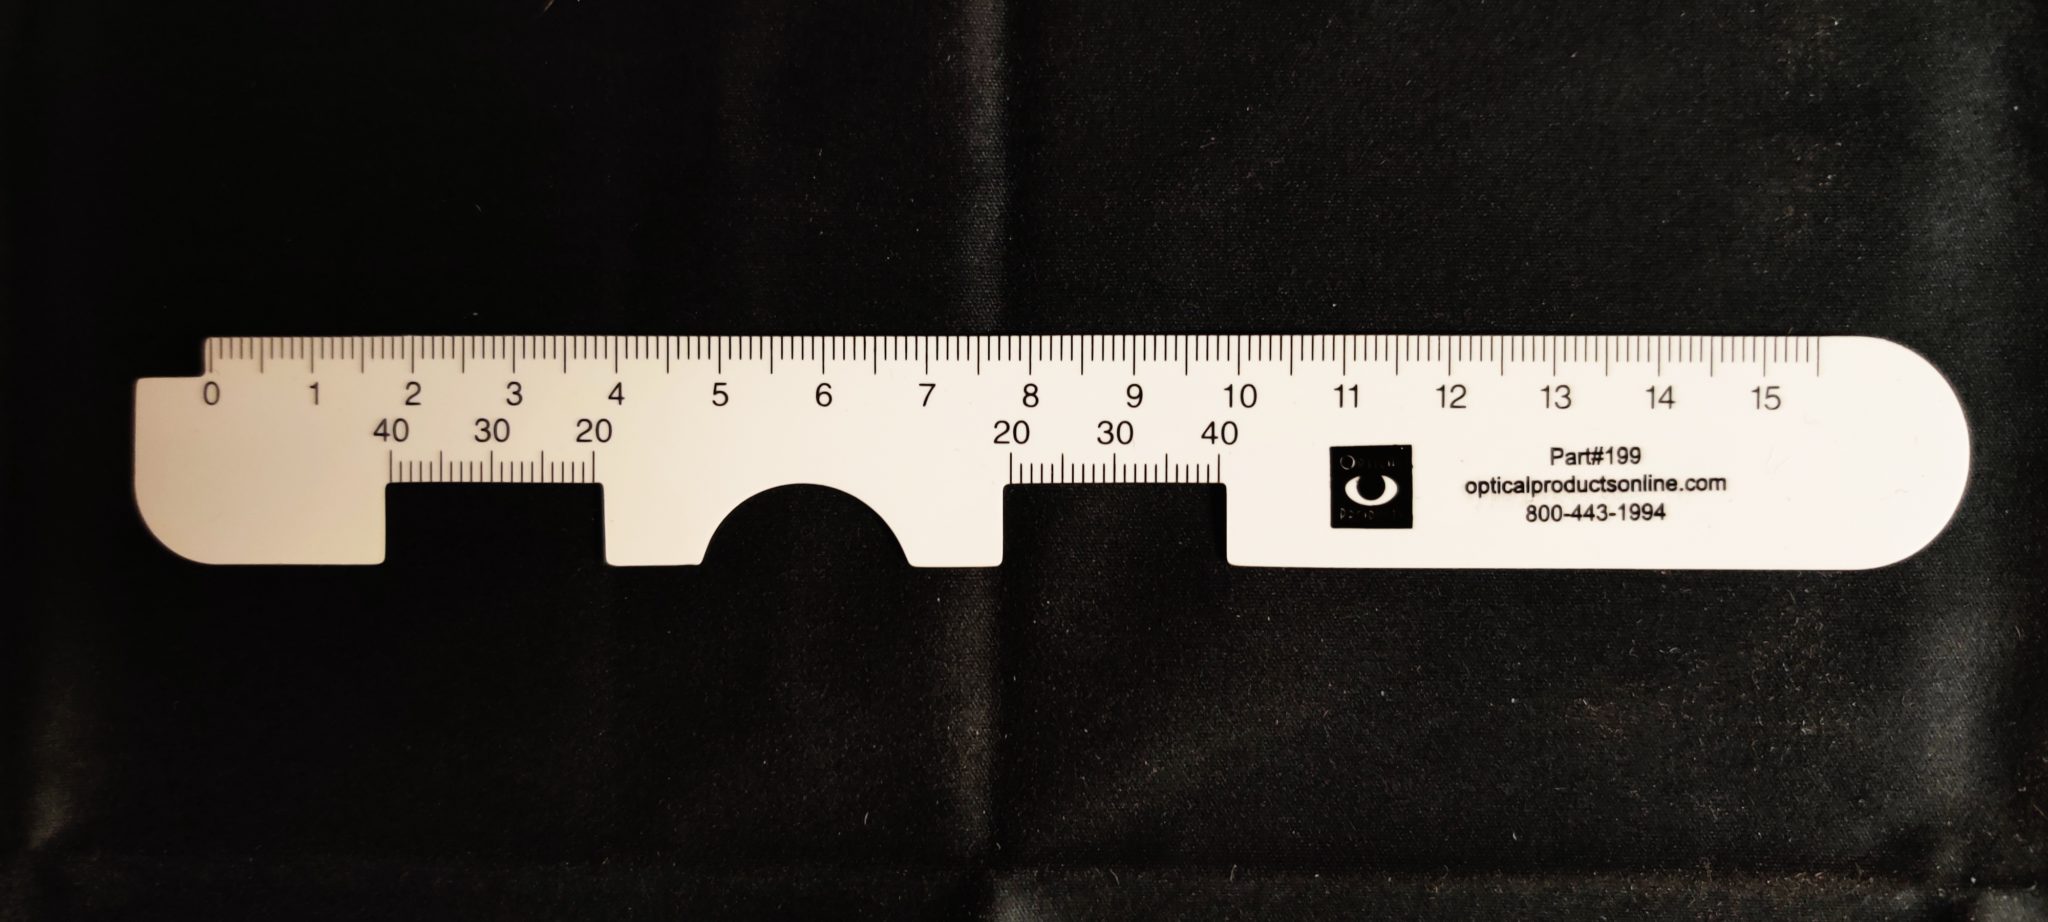 PLASTIC PD RULER OPTICAL PRODUCTS ONLINE